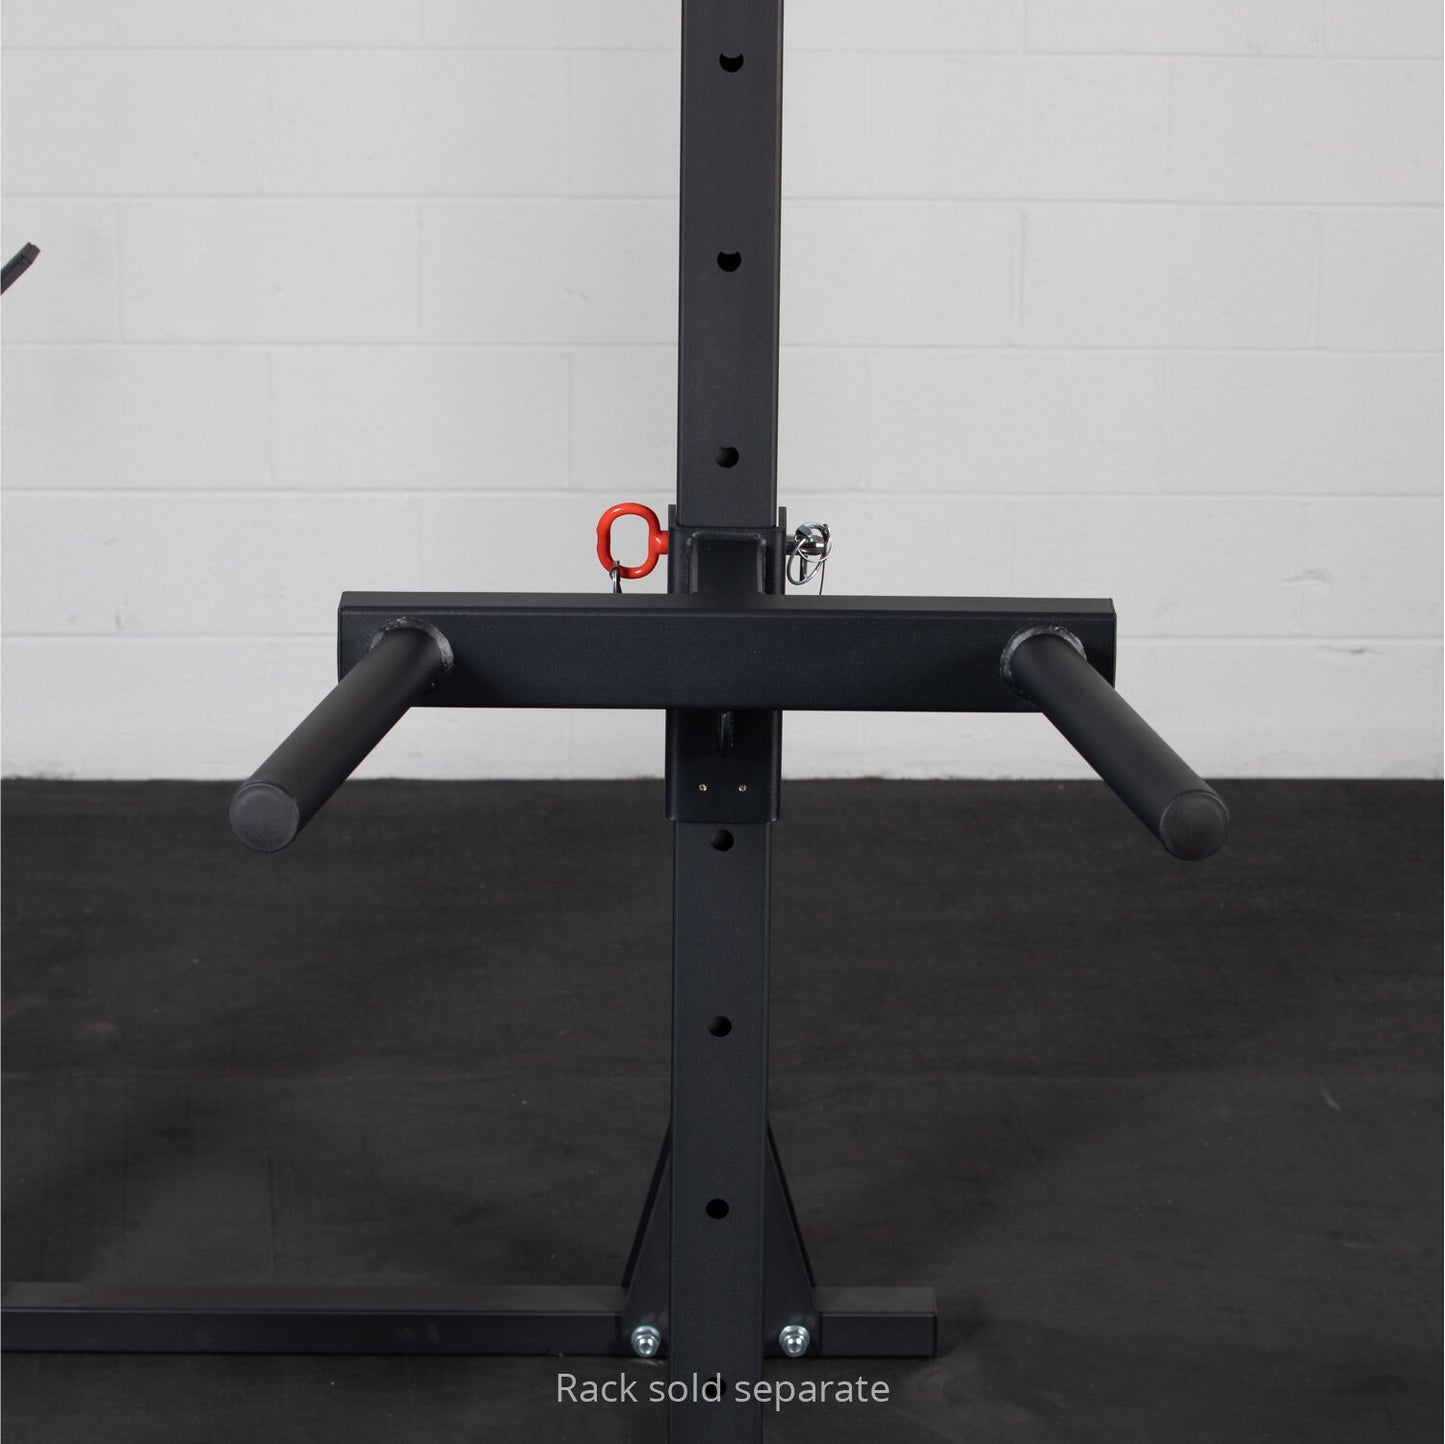 A black, sturdy Titan Fitness X-3 Series Y-Dip attachment with padded grips, highlighting a red lock, is mounted on a vertical post with a noticeable label indicating 'rack sold separately', set against - view 4